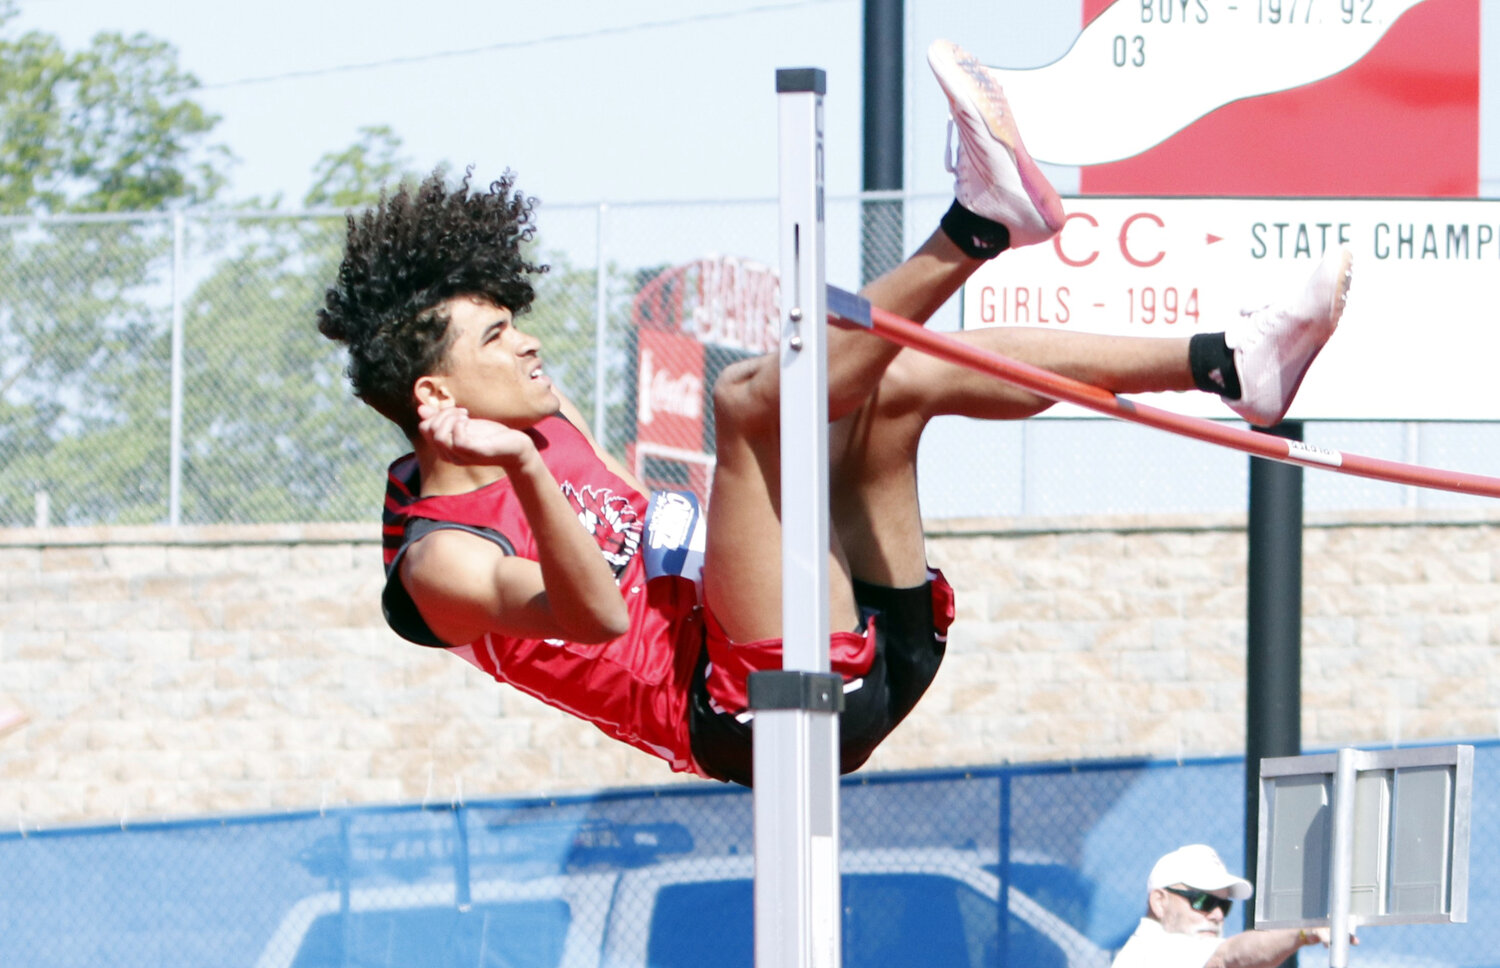 Warrenton senior Deacon Forrest attempts to clear the bar during the high jump competition May 26 at the Missouri state track and field meet in Jefferson City.